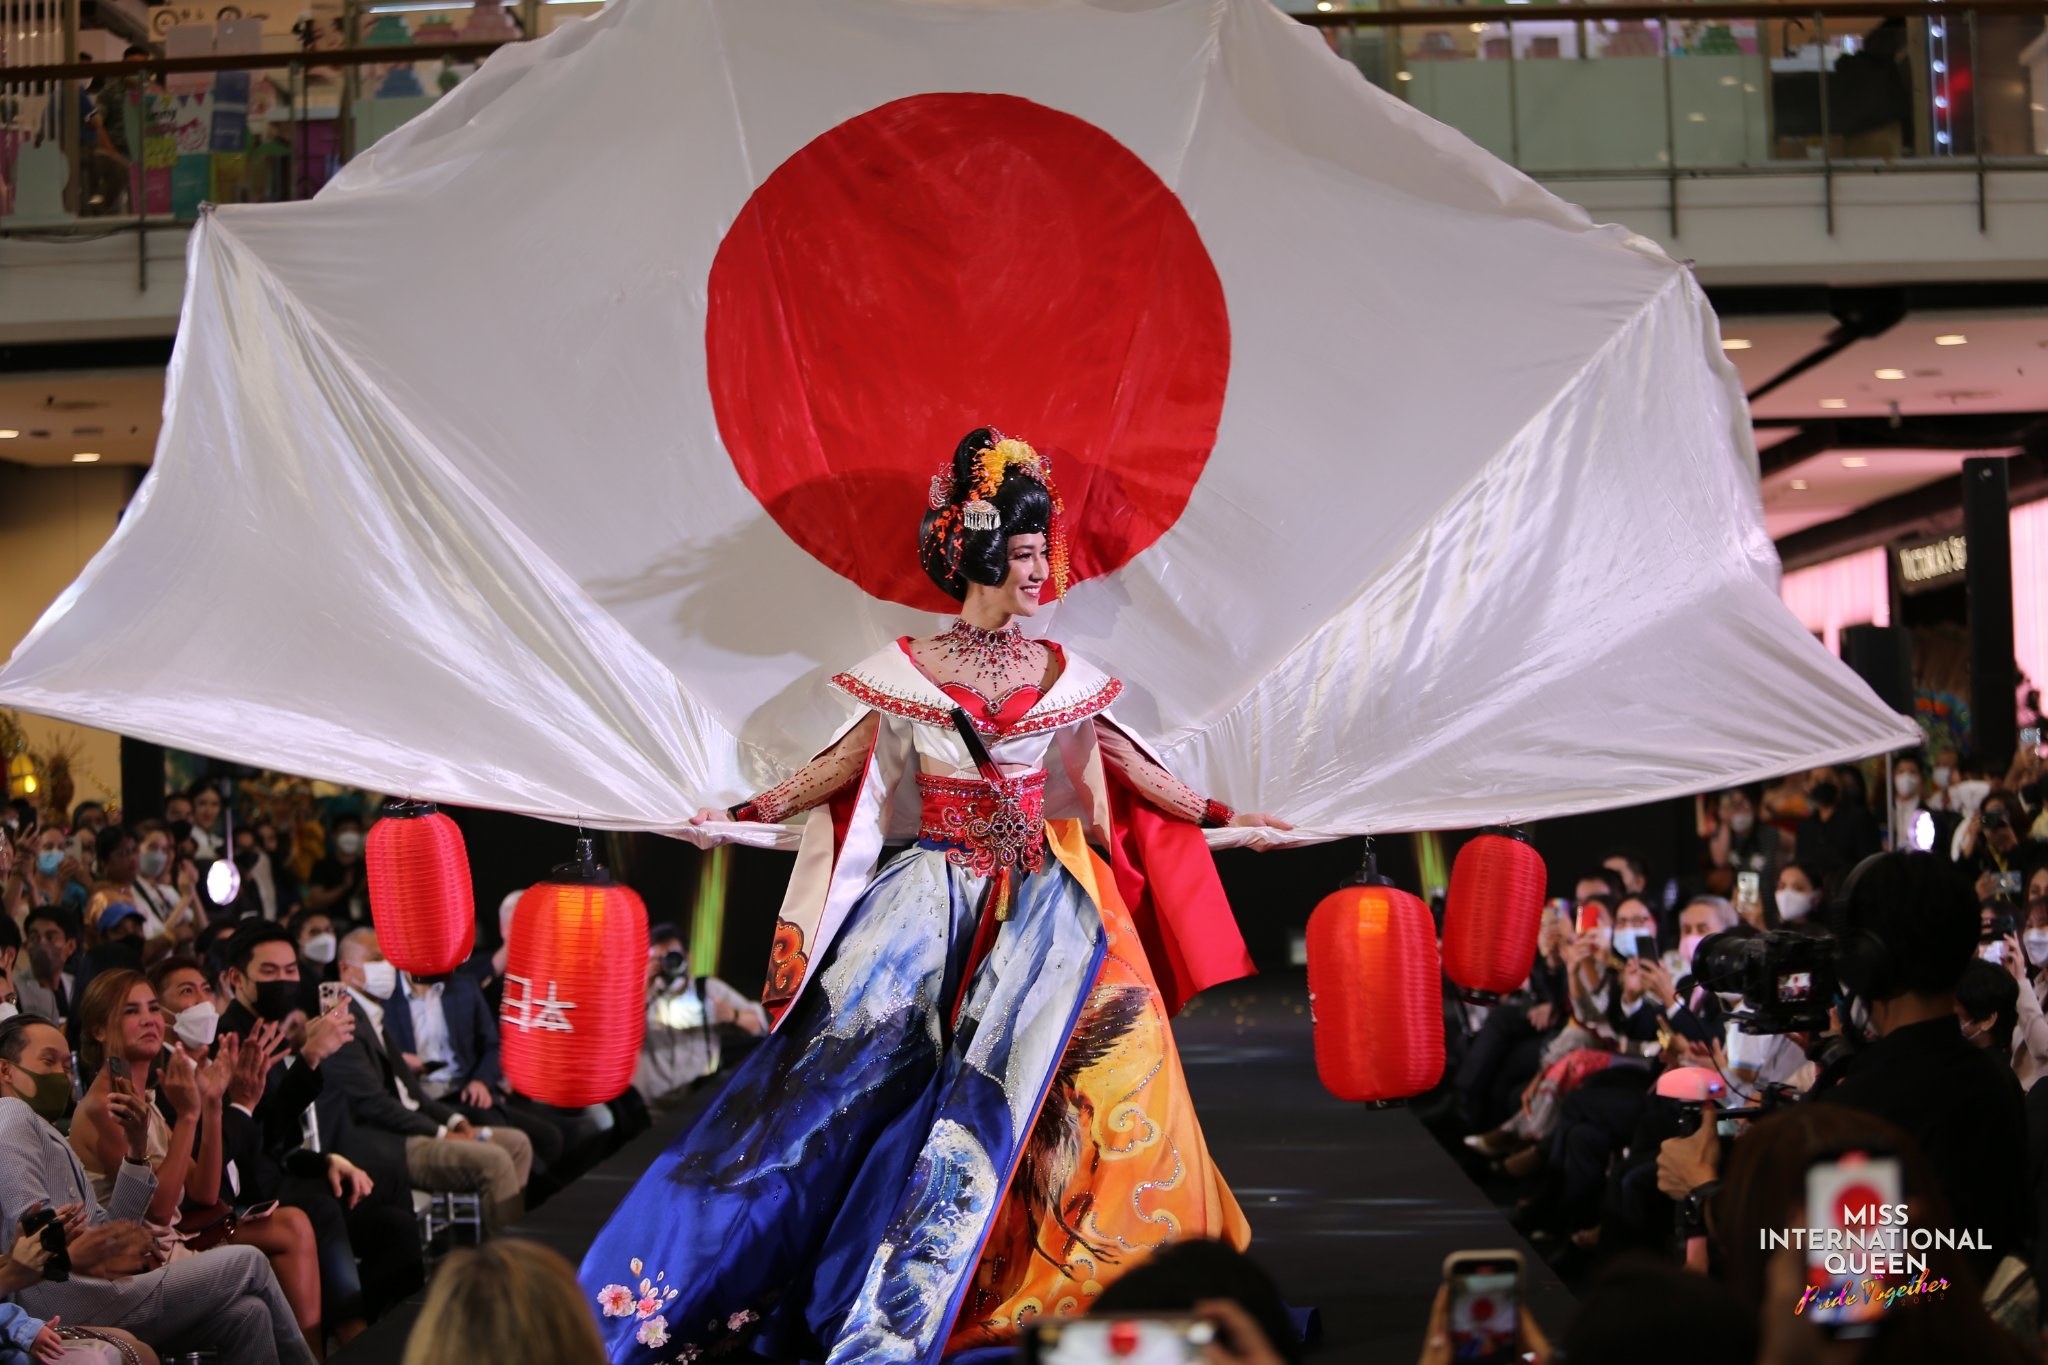 Miss Japan walks the runway with a Japanese flag fan and lanterns